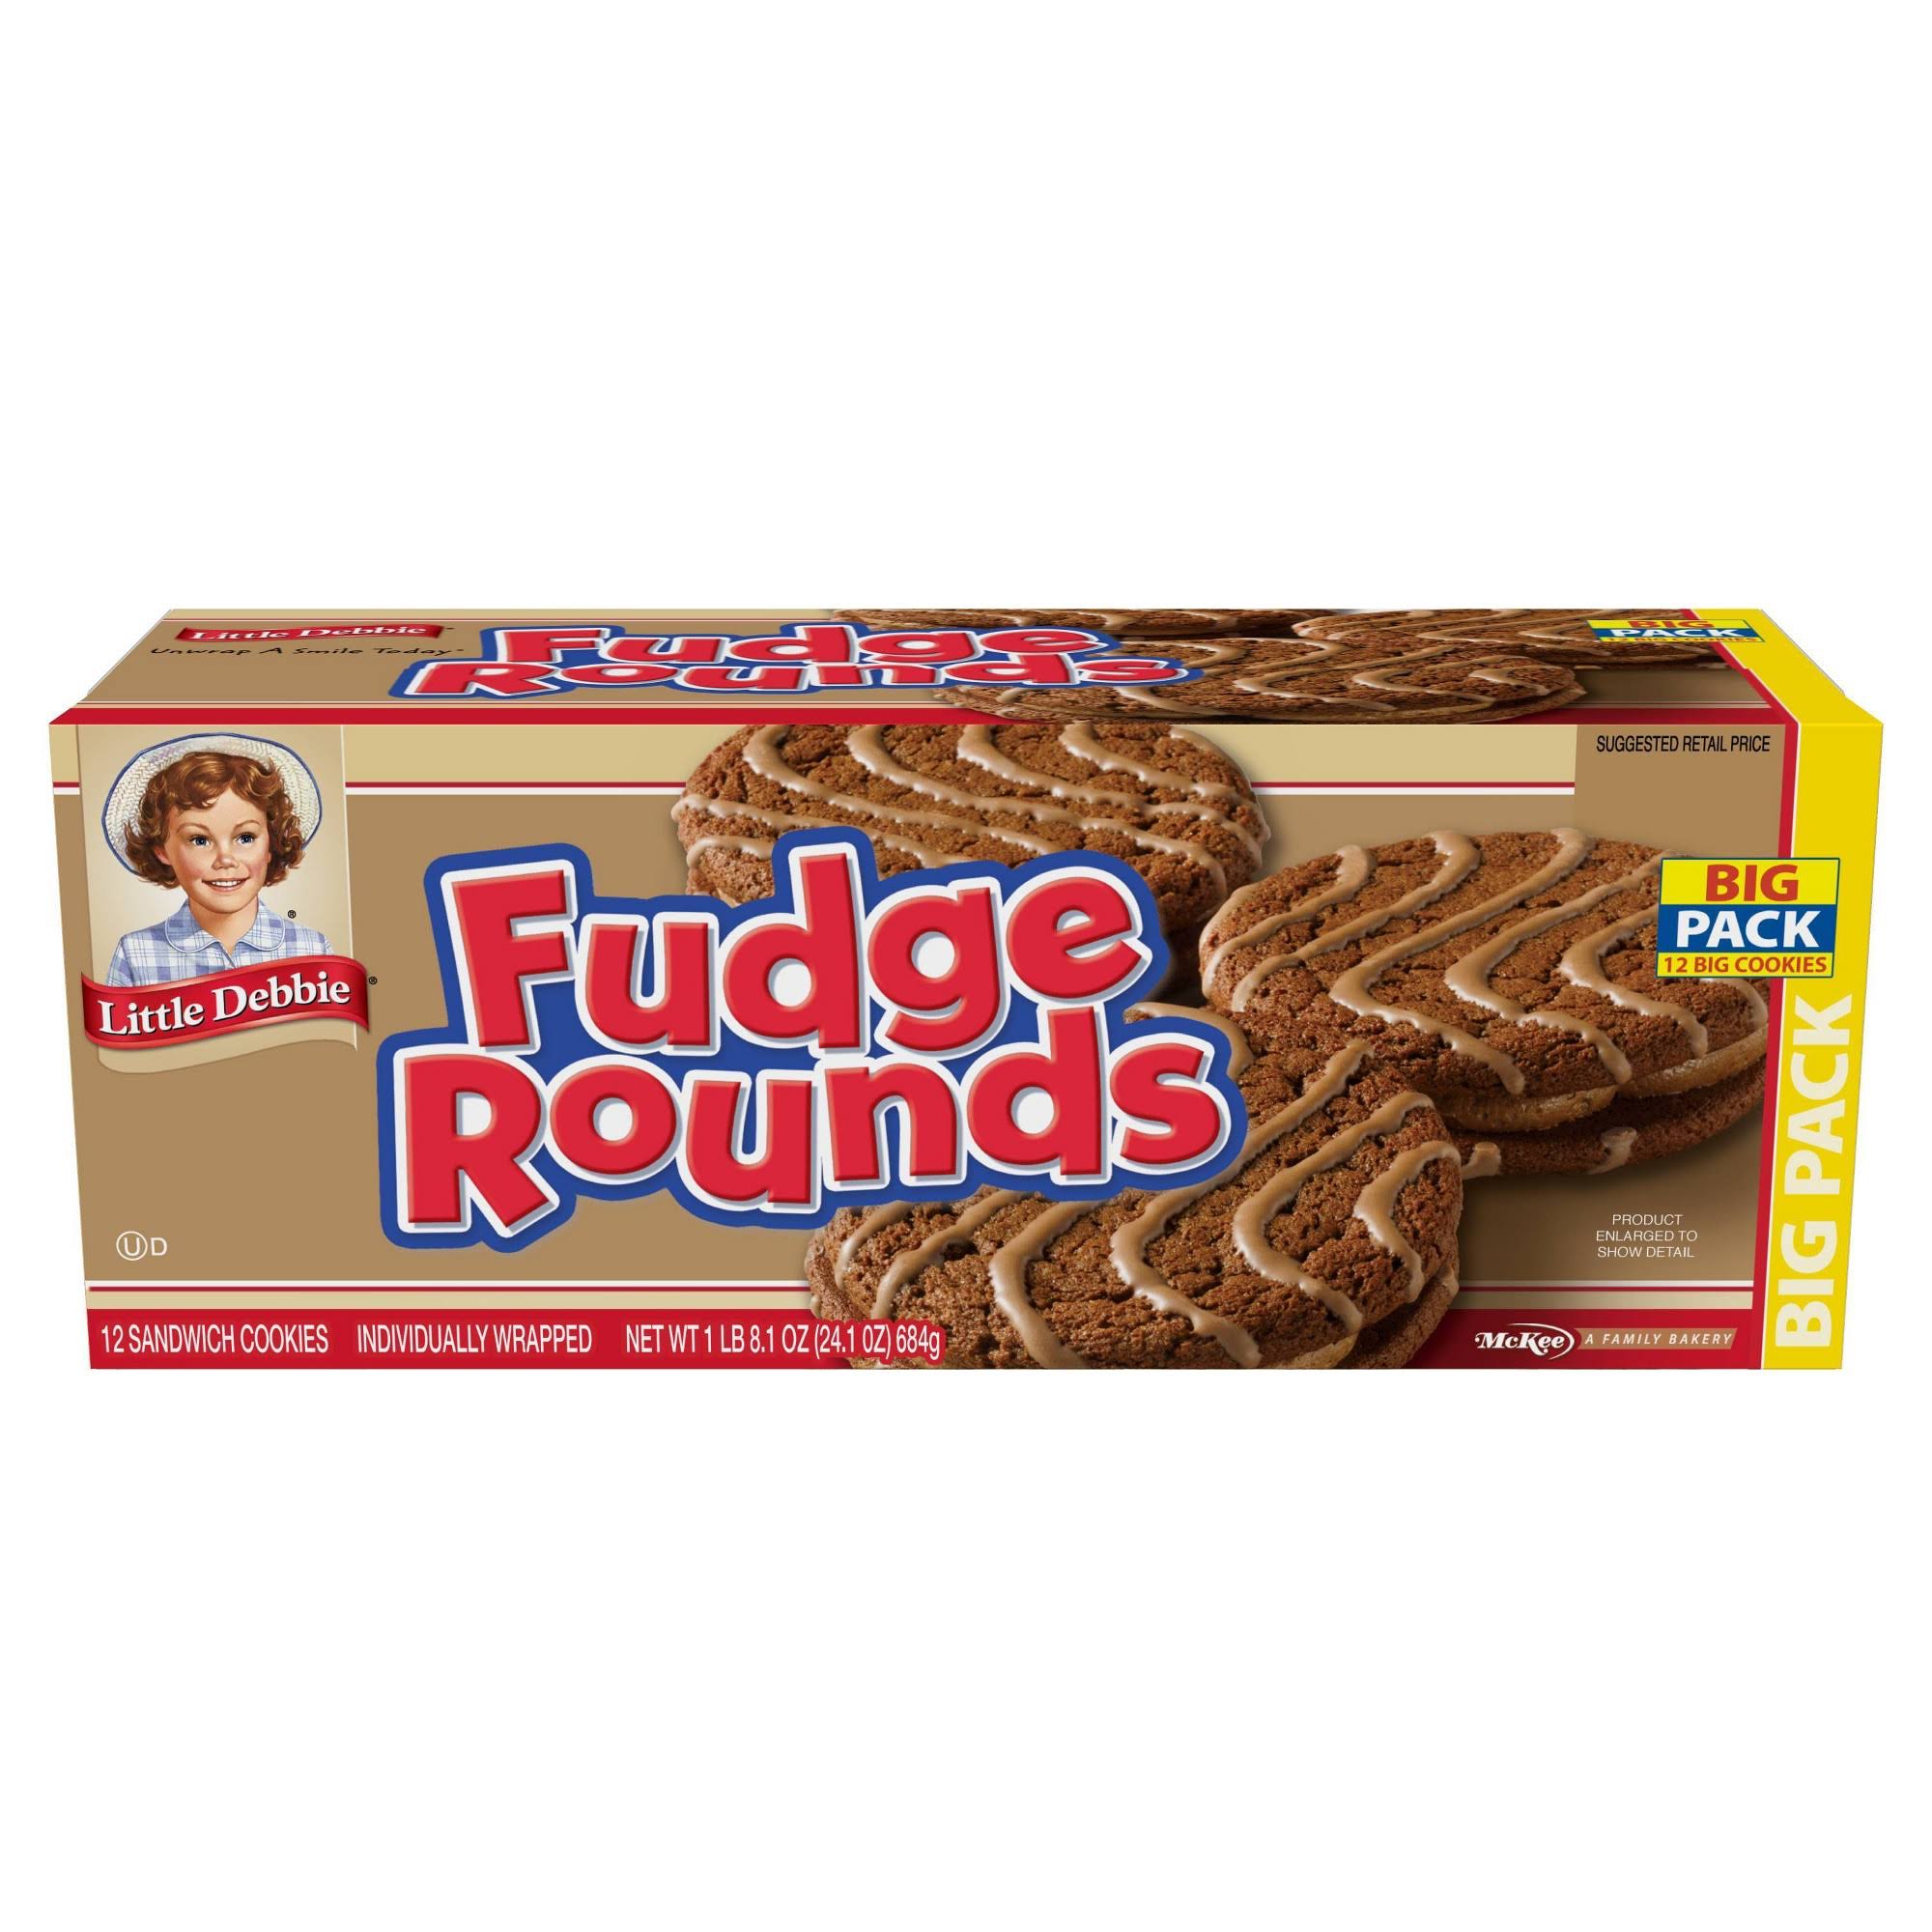 Little Debbie Fudge Rounds Snack - 36 Individually Wrapped Packs